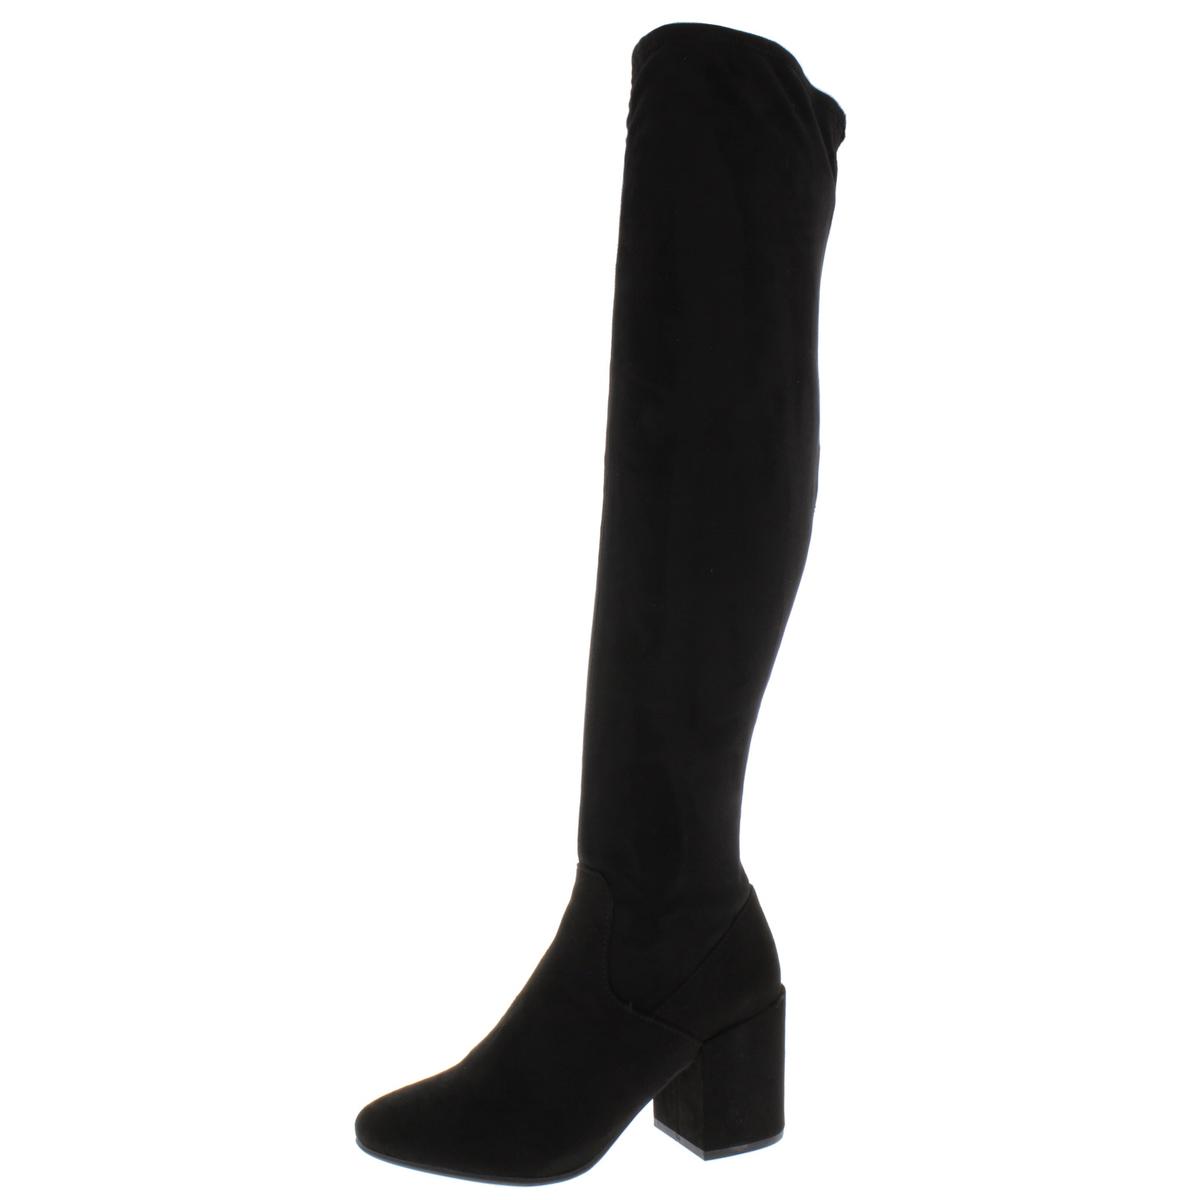 Bar III Gabrie Womens Faux Suede Block Heel Over-The-Knee Boots